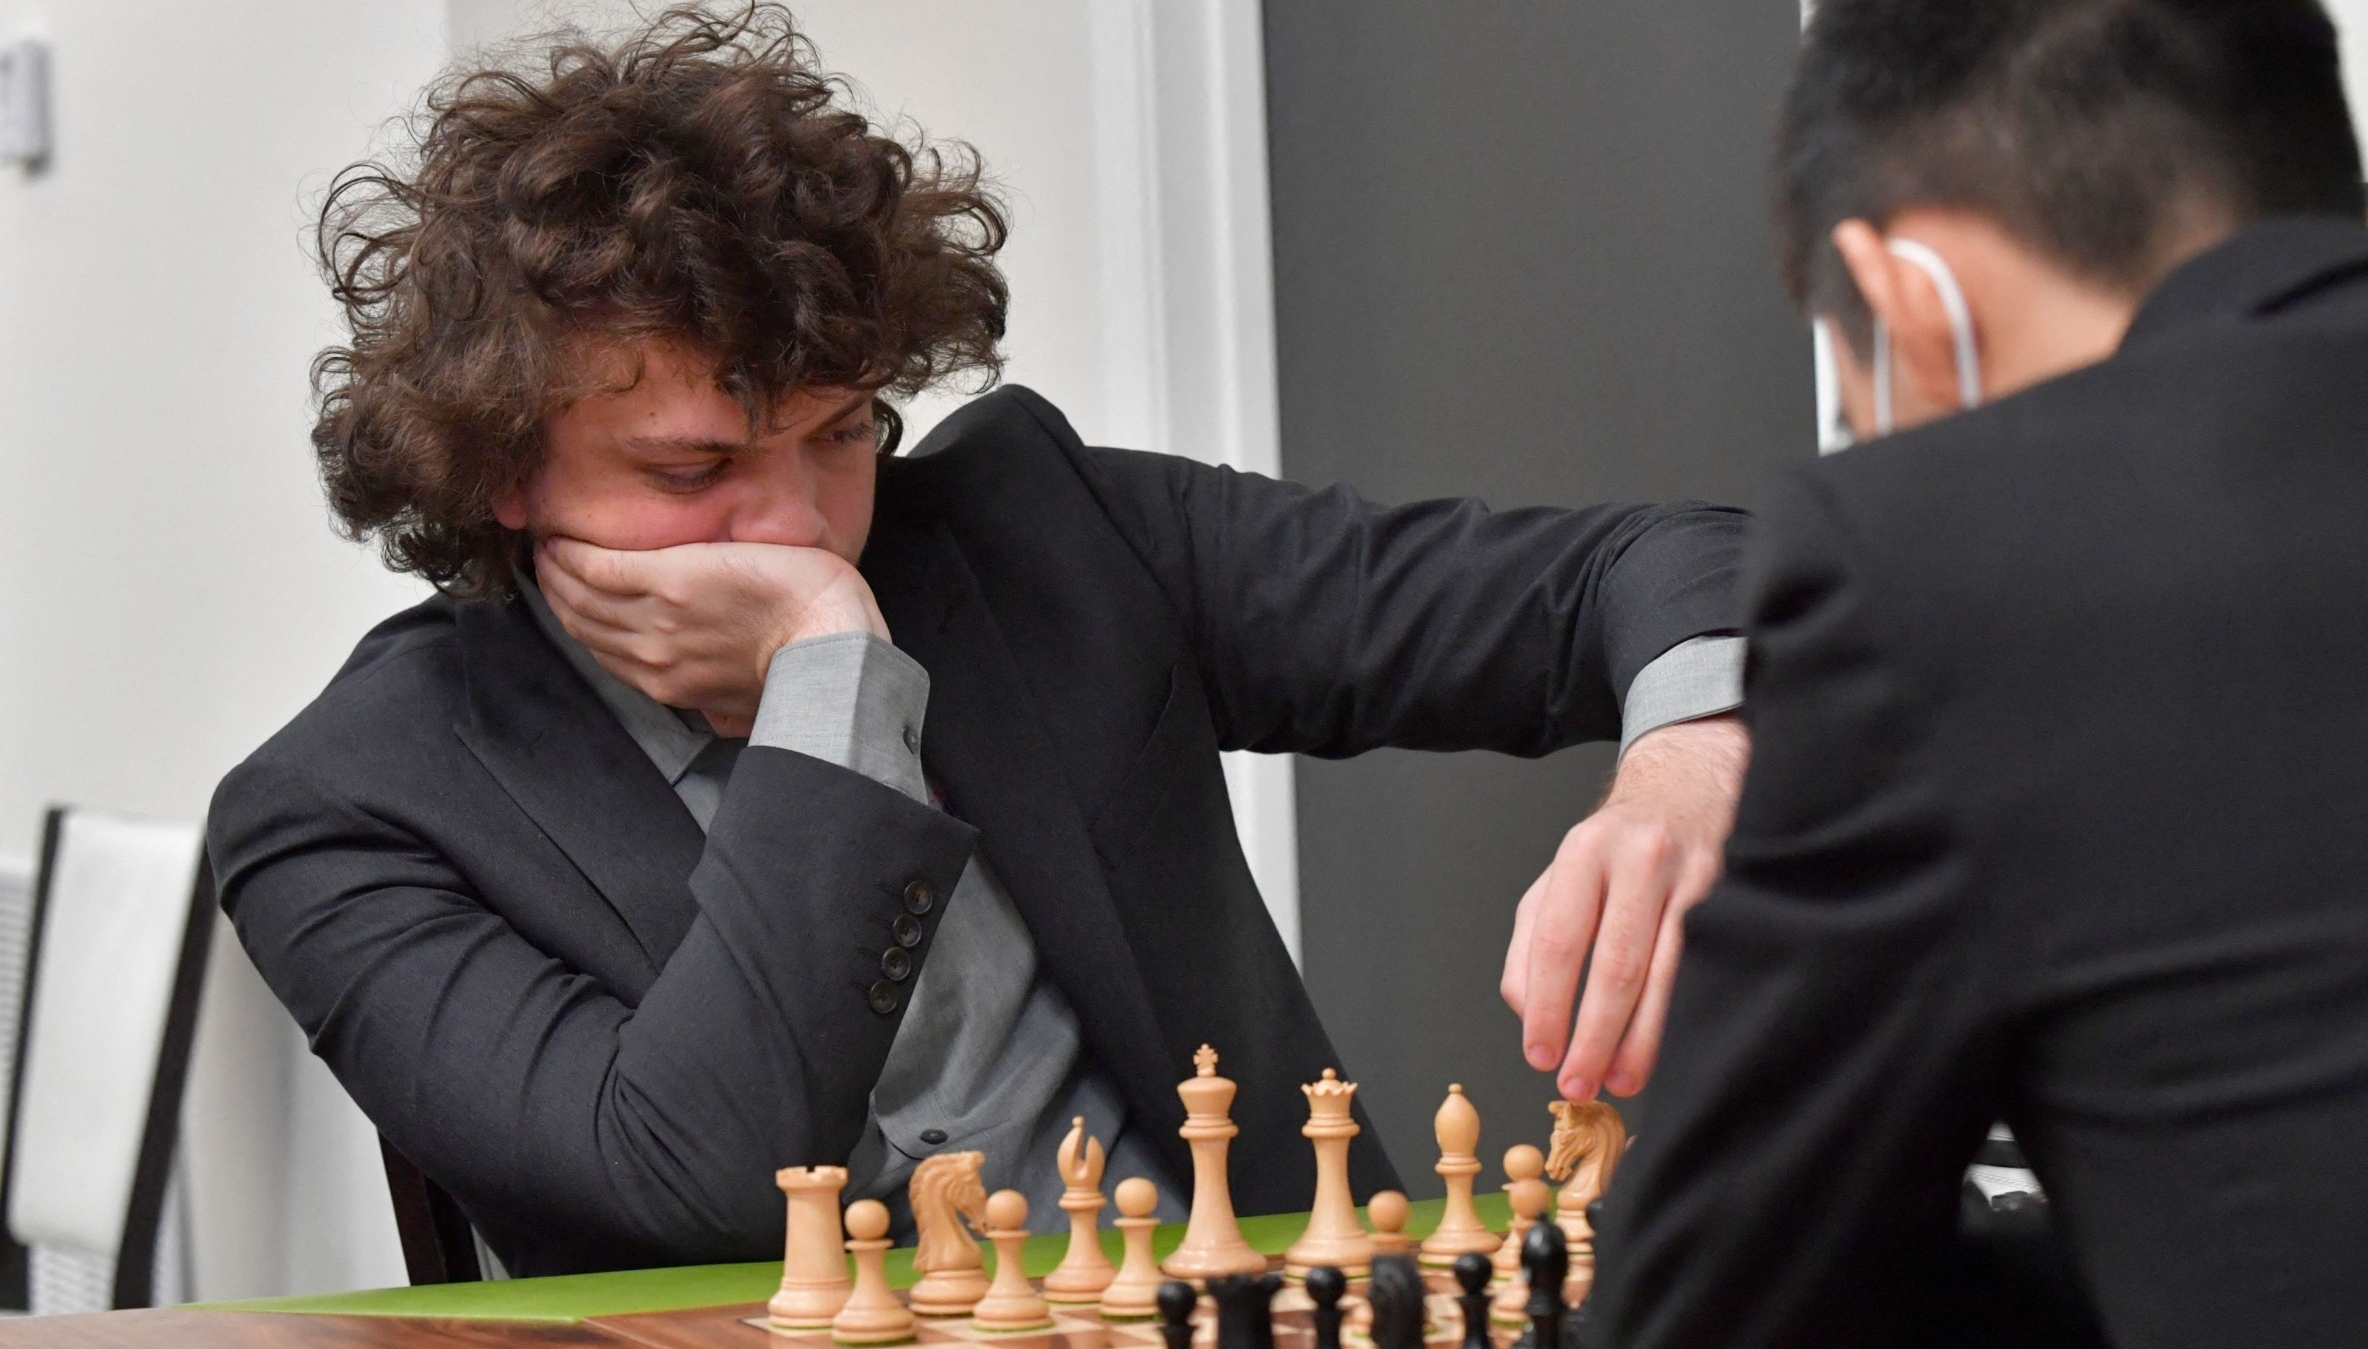 Chess: Hans Niemann playing in London this week amid new controversy